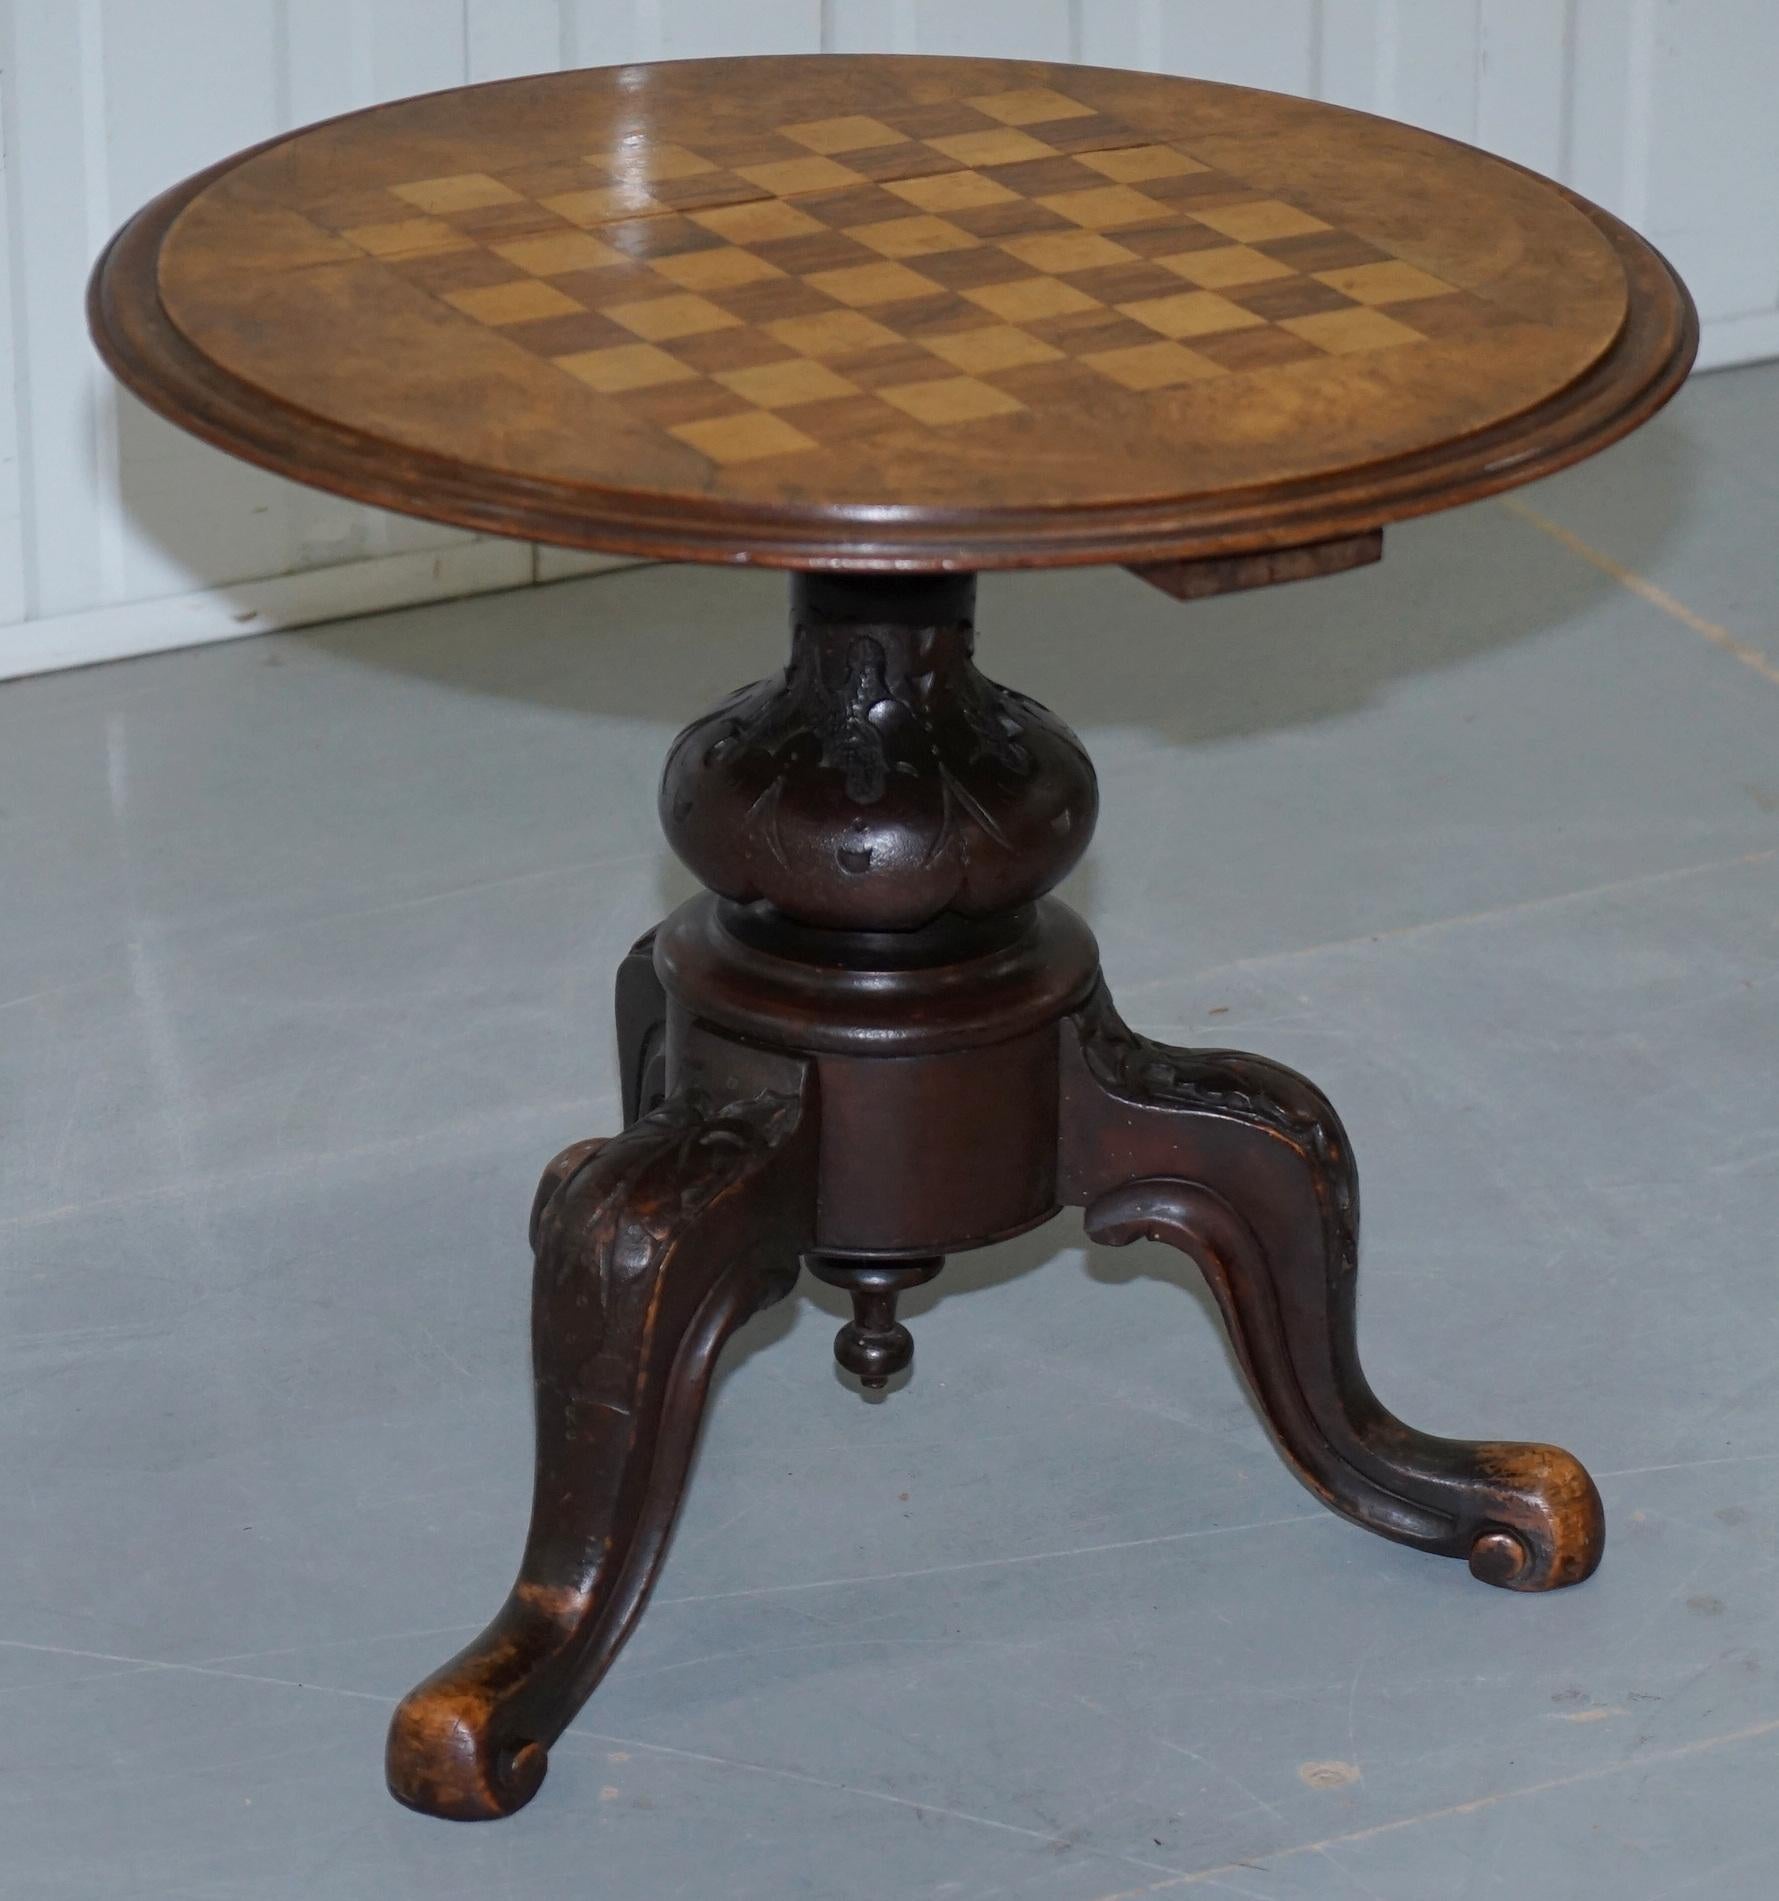 We are Furniture is delighted to offer for sale this lovely 140+ plus year old height adjustable Victorian burr walnut chess or games table with hand carved legs

This table is glorious to look at, truly stunning, the timber patina is amazing, the